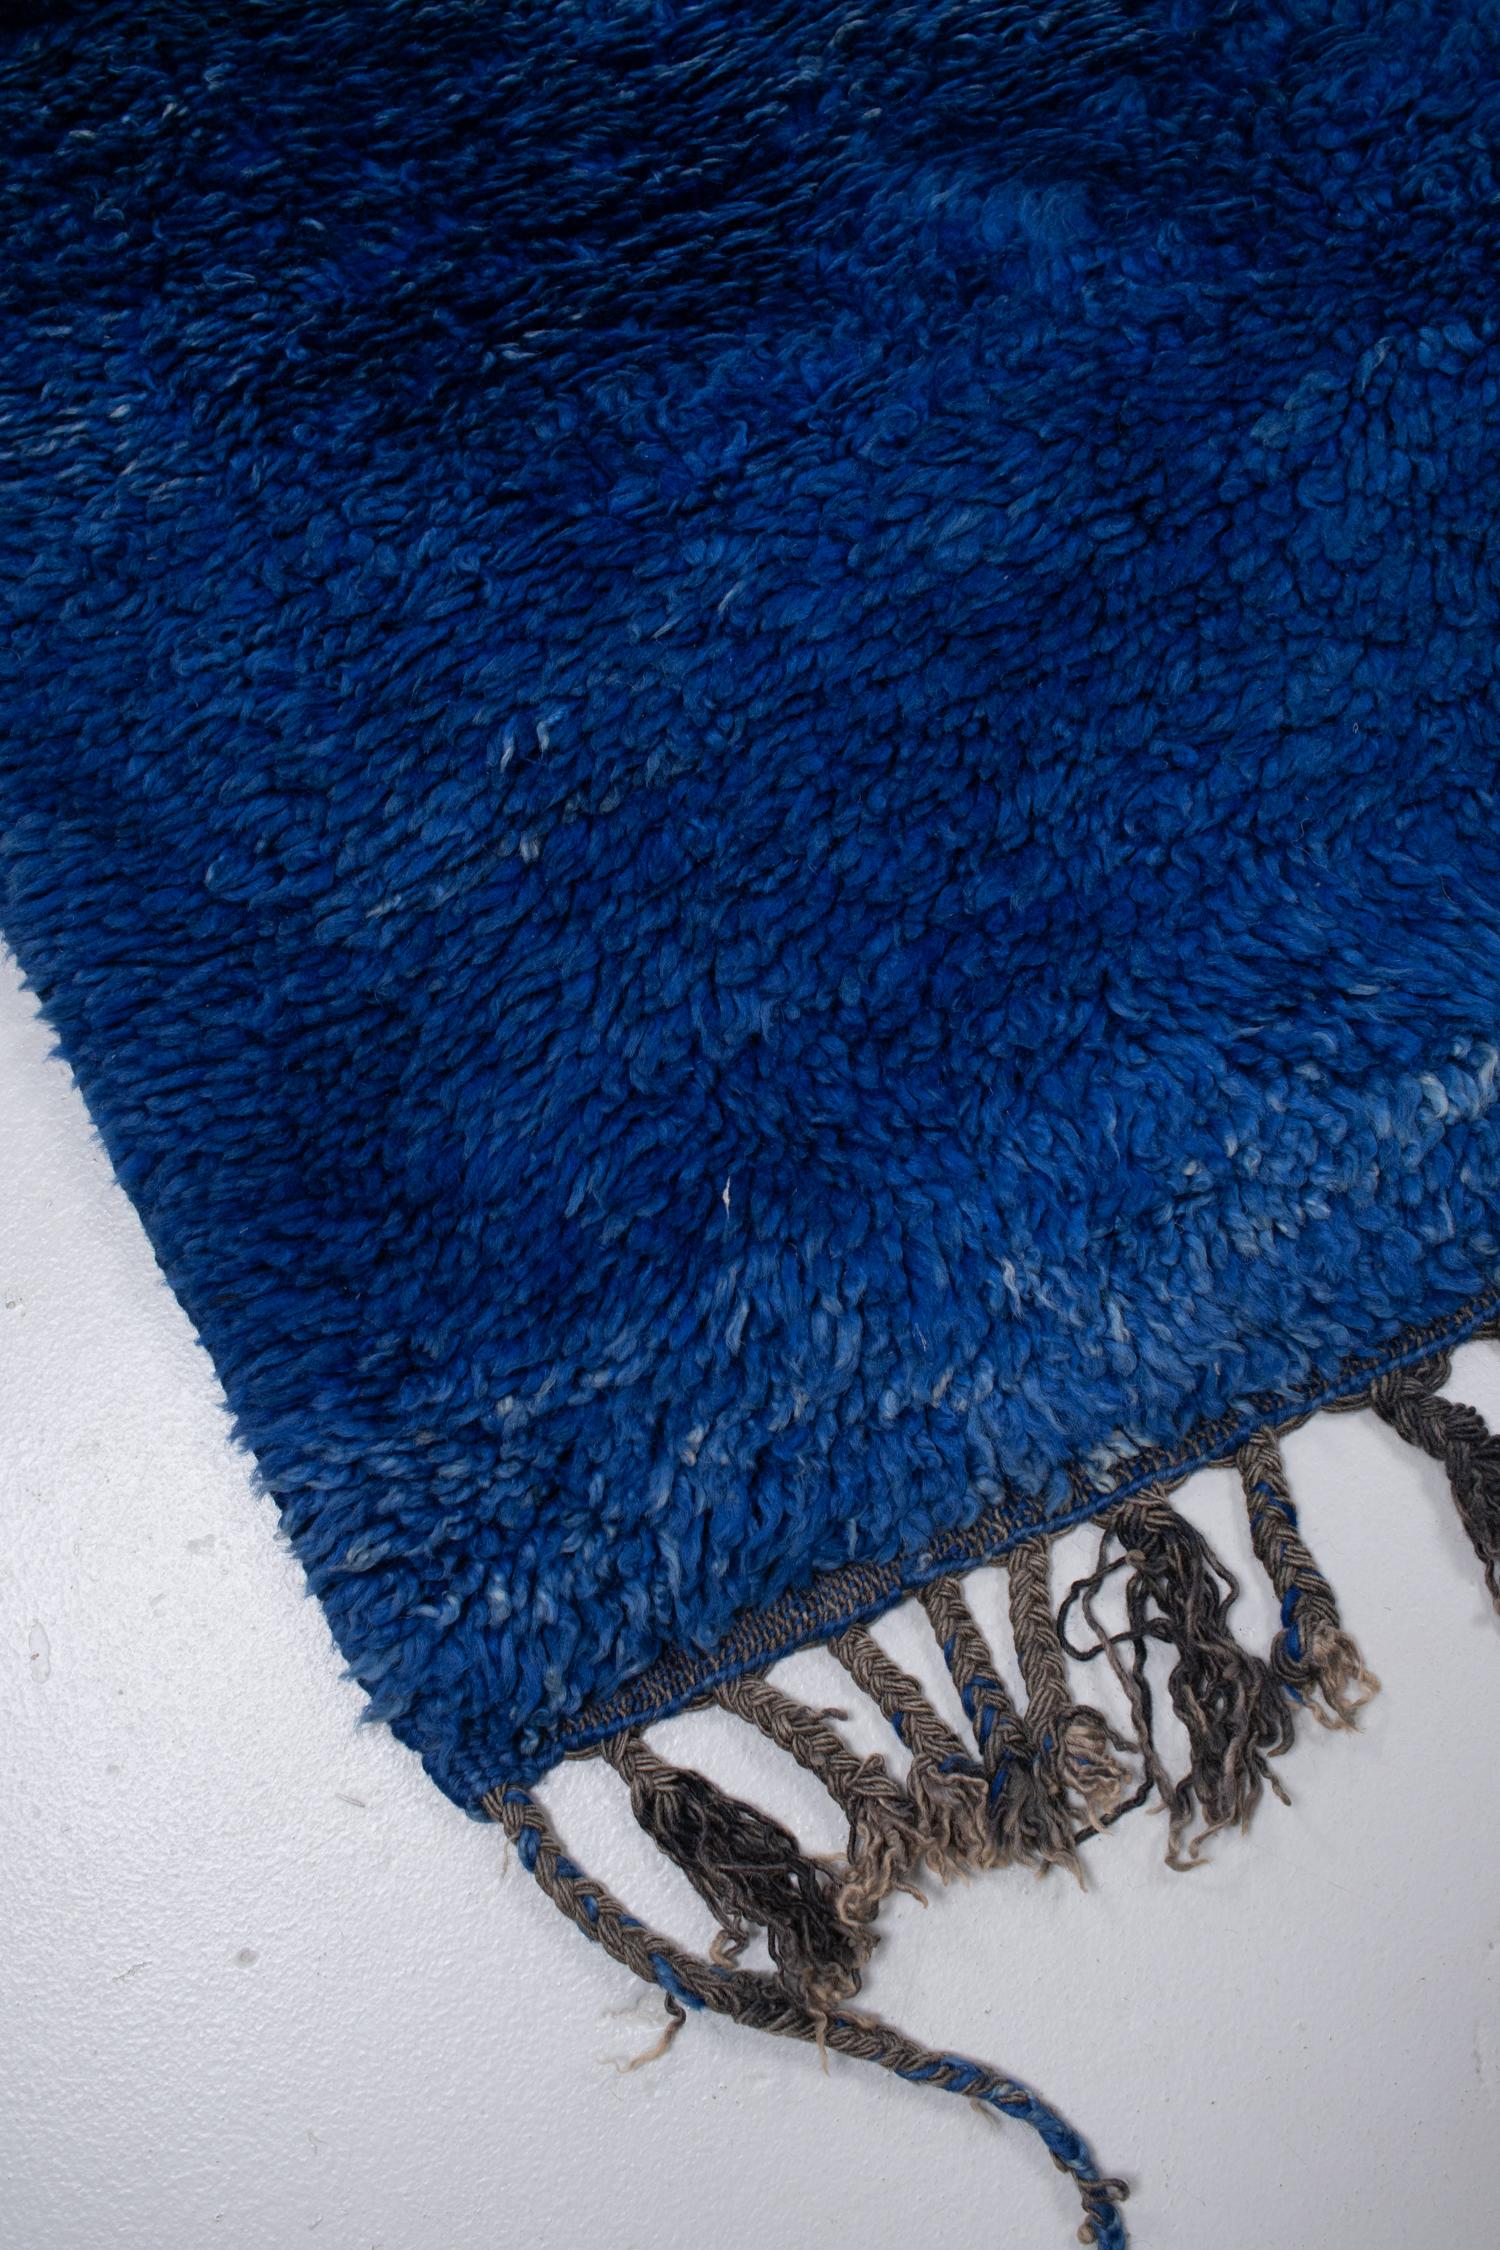 Vintage Deep Blue Beni Mrirt Rug In Good Condition For Sale In West Palm Beach, FL